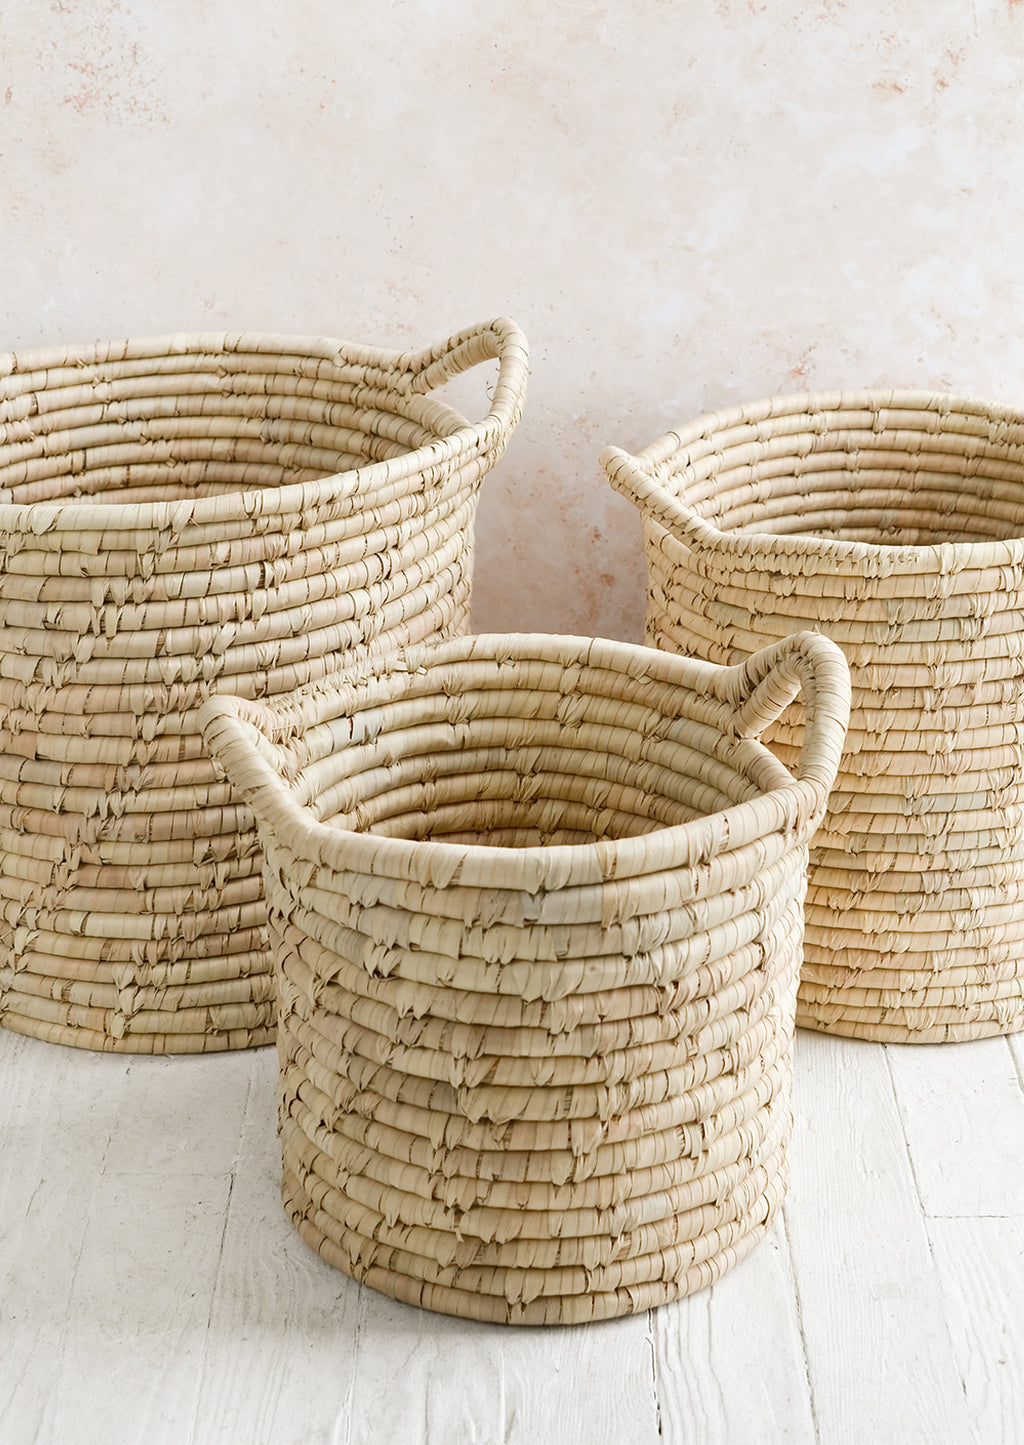 2: Three round, open-top storage bins woven from natural palm leaf, shown in three incremental sizes.